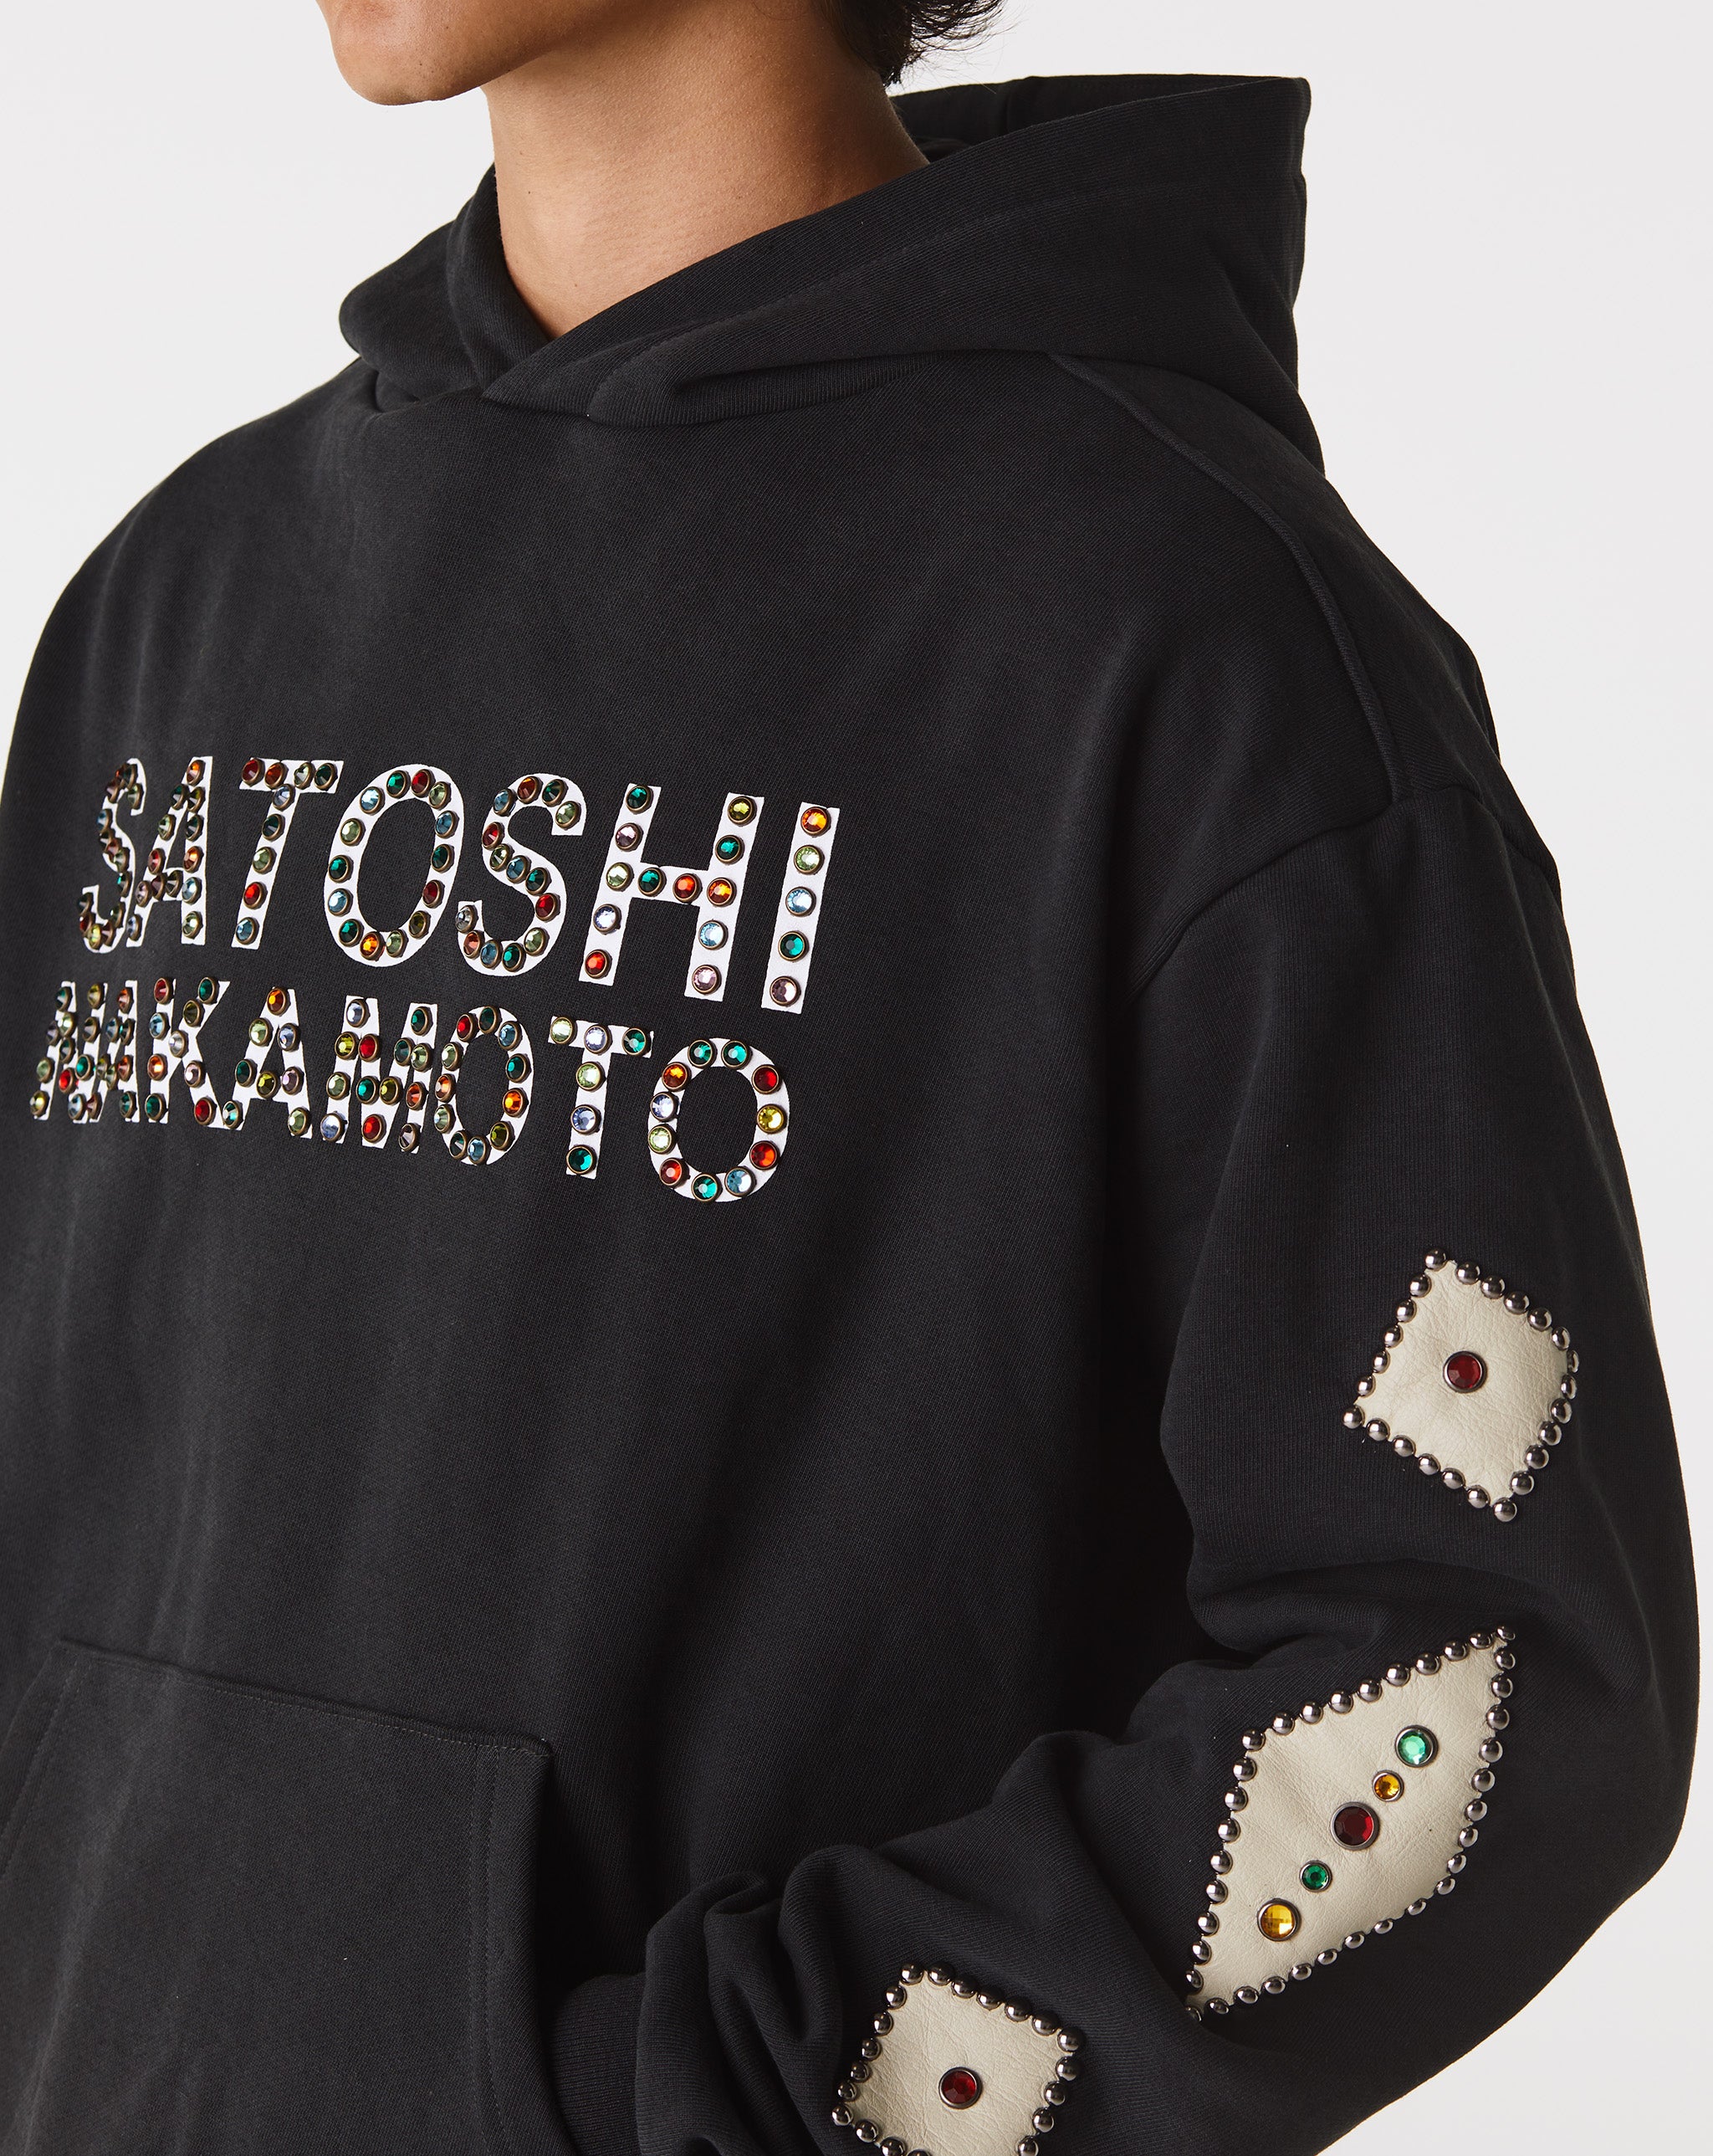 Satoshi Nakamoto Other Scenes Army Hoodie  - Cheap Cerbe Jordan outlet